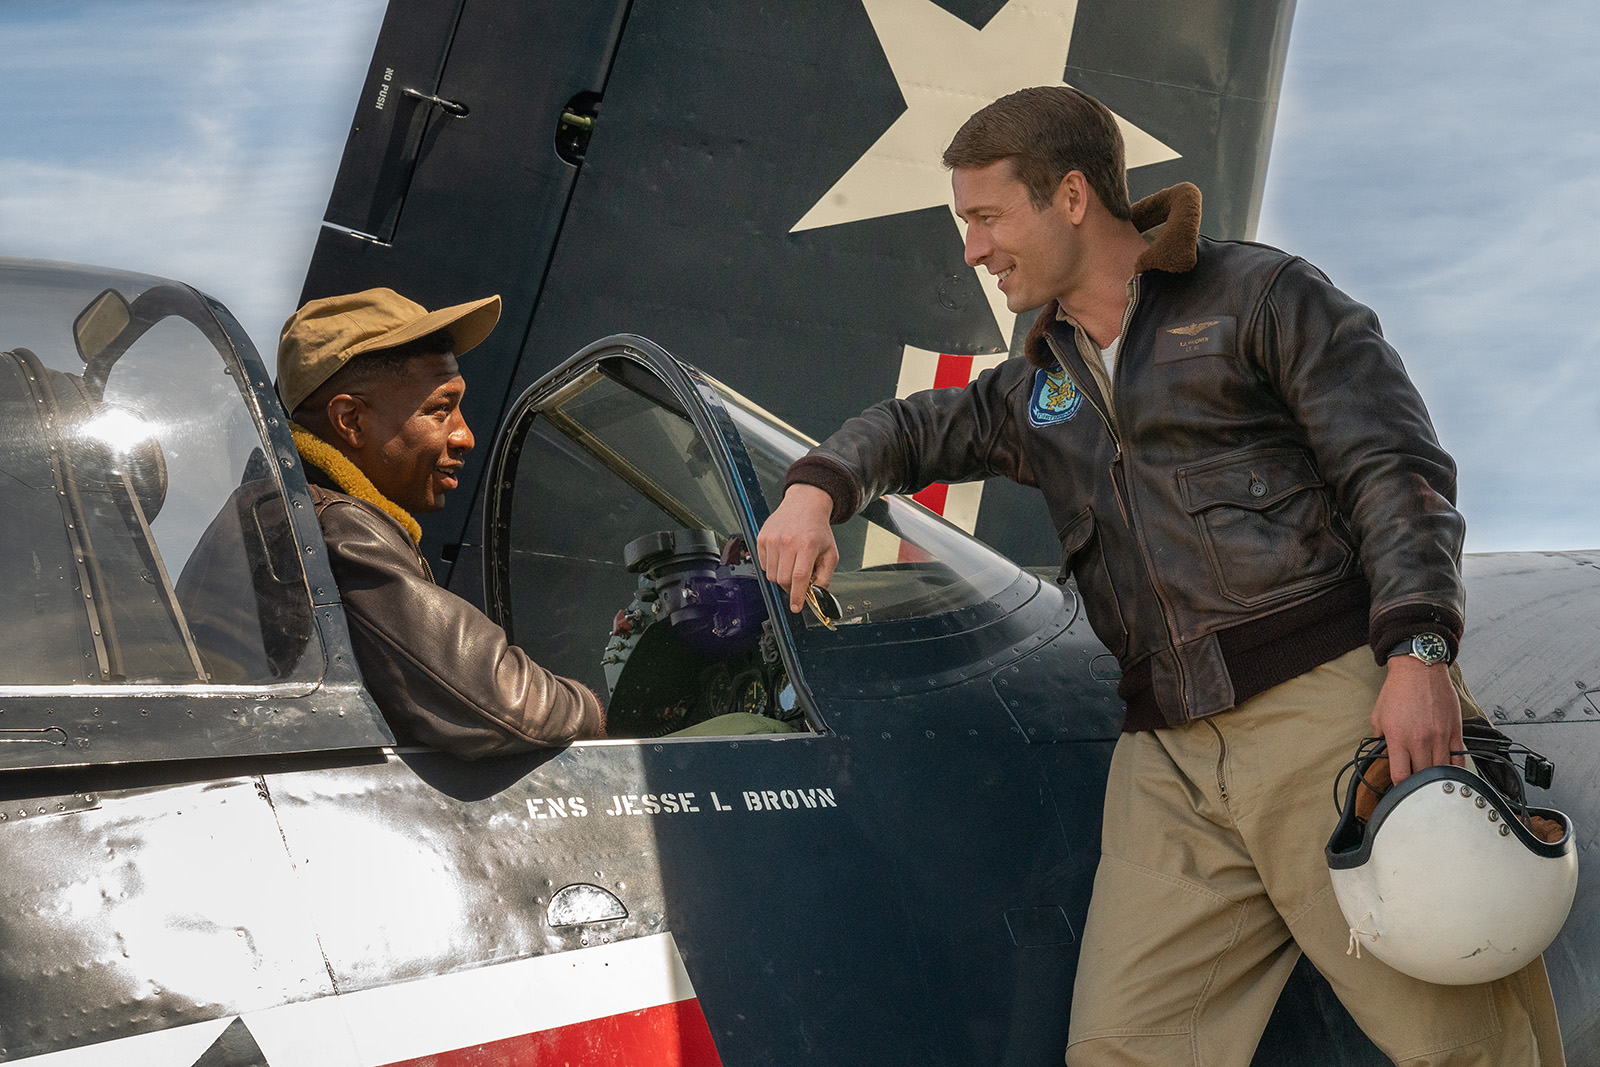 Devotion tells the story of US airmen Jesse Brown (played by Jonathan Masters, left) and Tom Hudner (Glen Powell, right). Image © Sony Pictures Entertainment